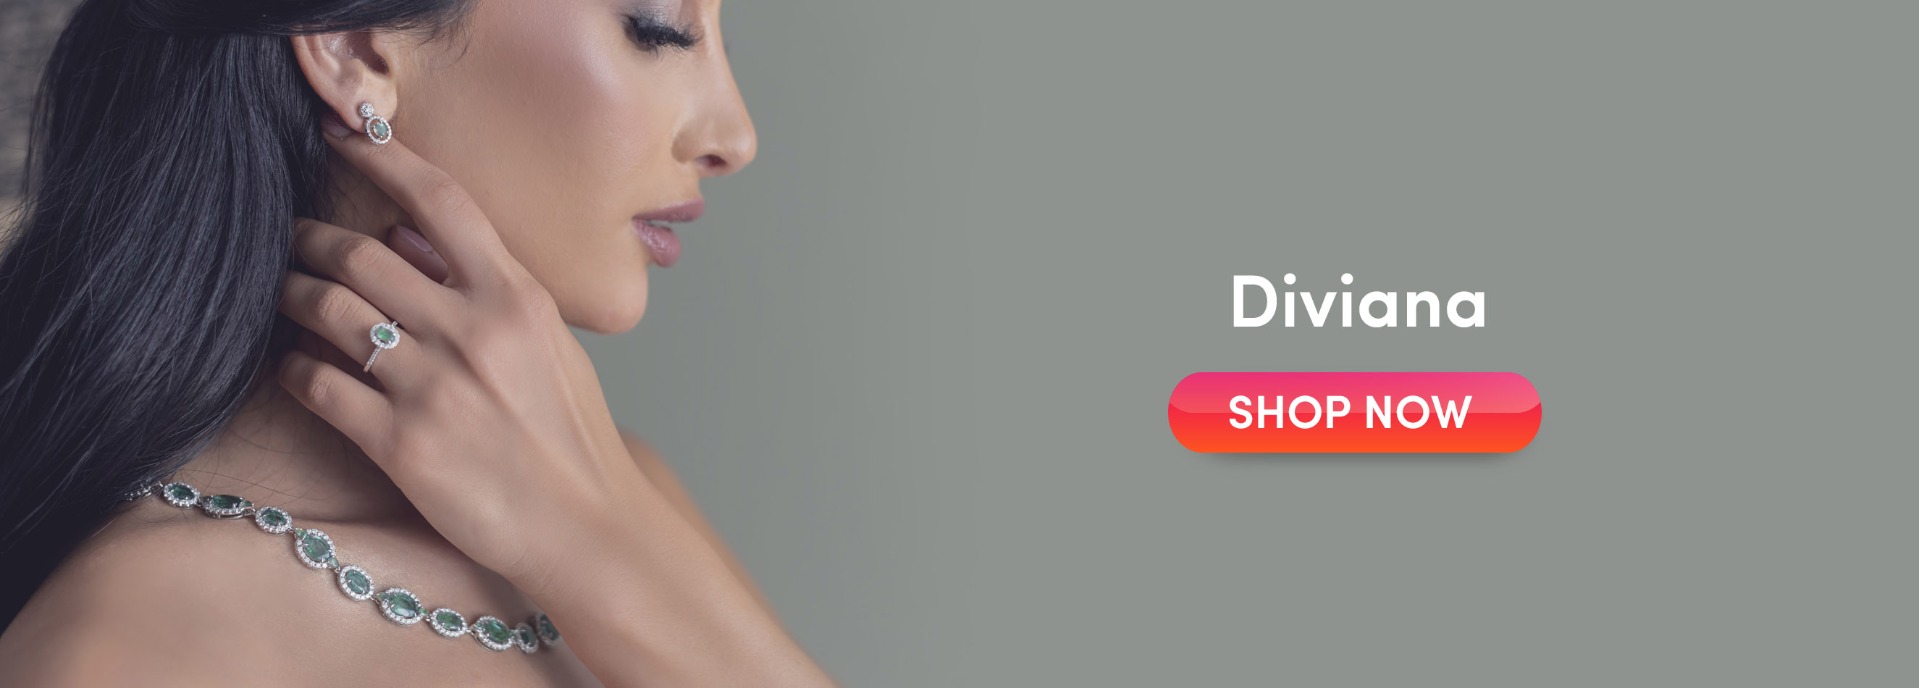 Diviana Jewelry Collection Banner